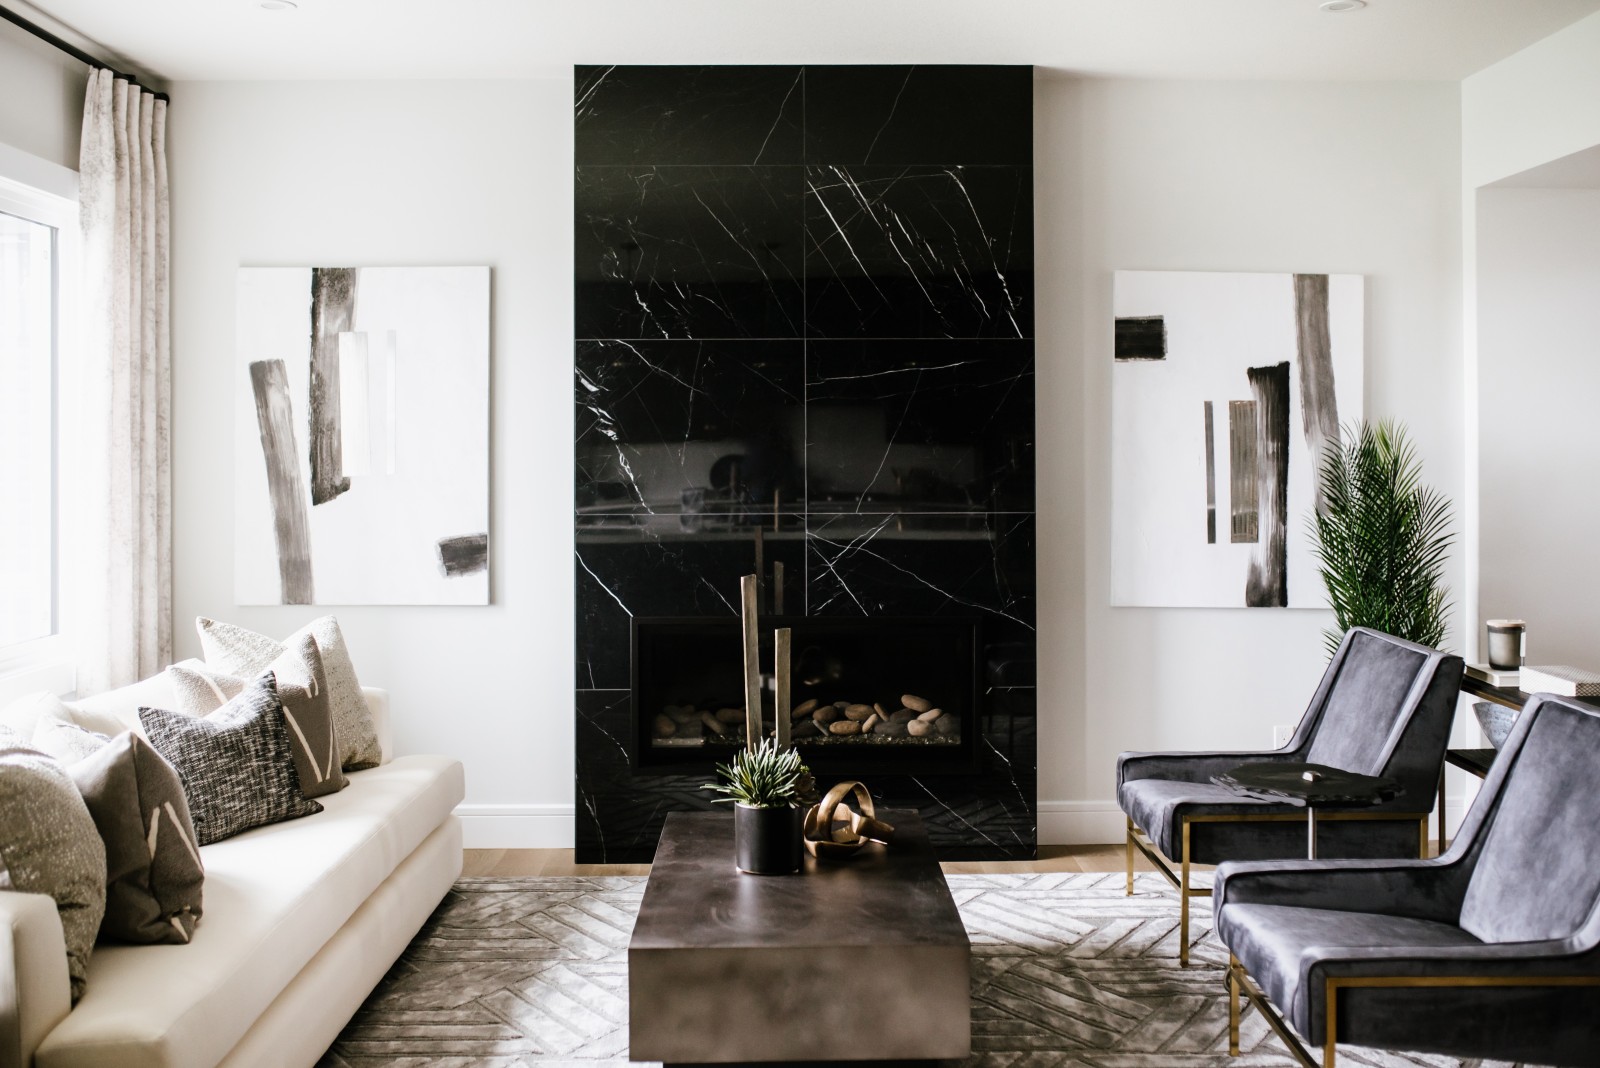 Statement great room fireplace clad in modern large format black tile flanked on either side with modern art